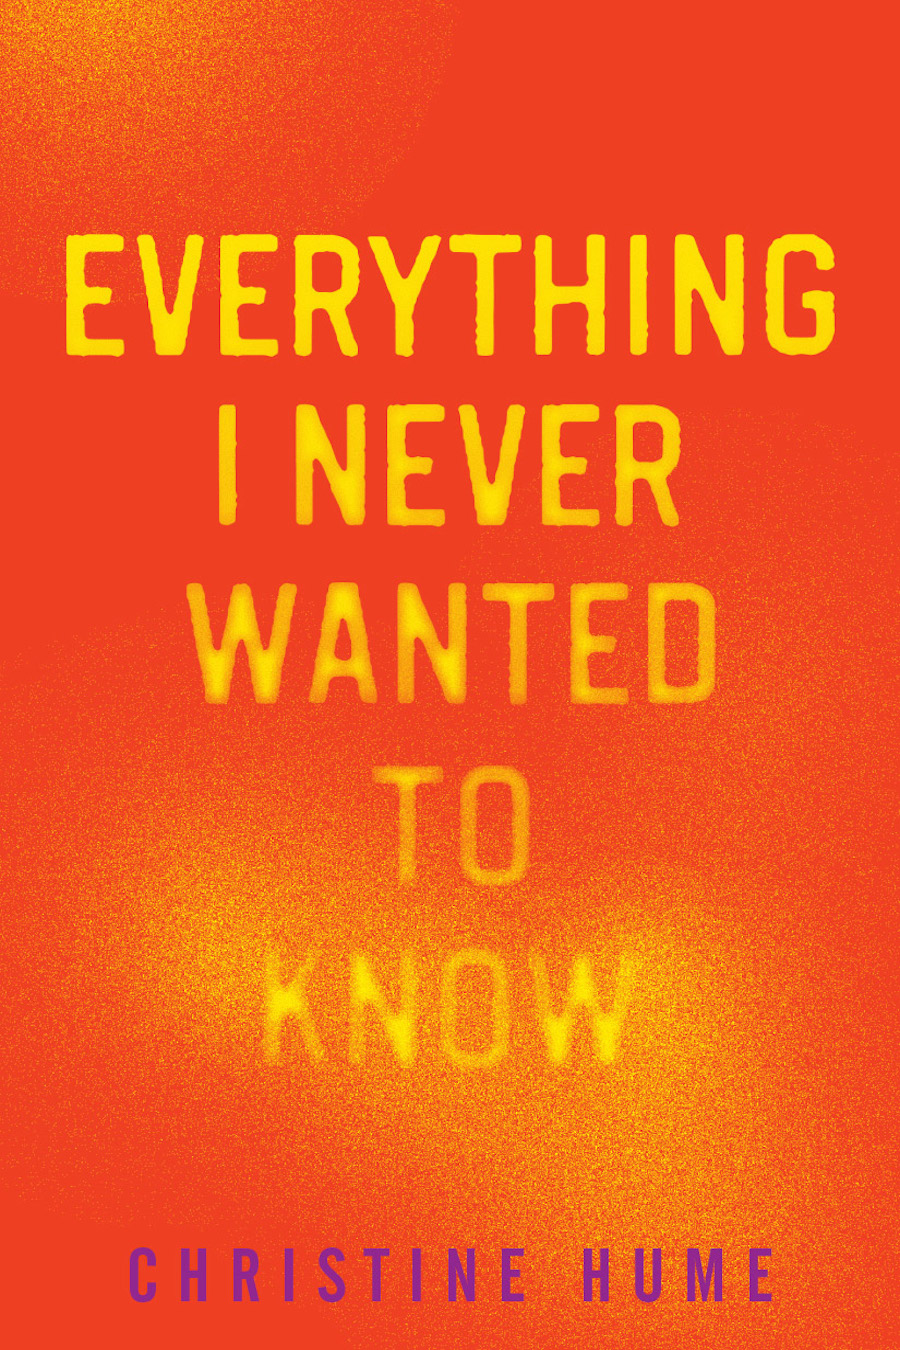 Front cover of Everything I Never Wanted to Know by Christine Hume, in bright yellow letters on a bright orange background.